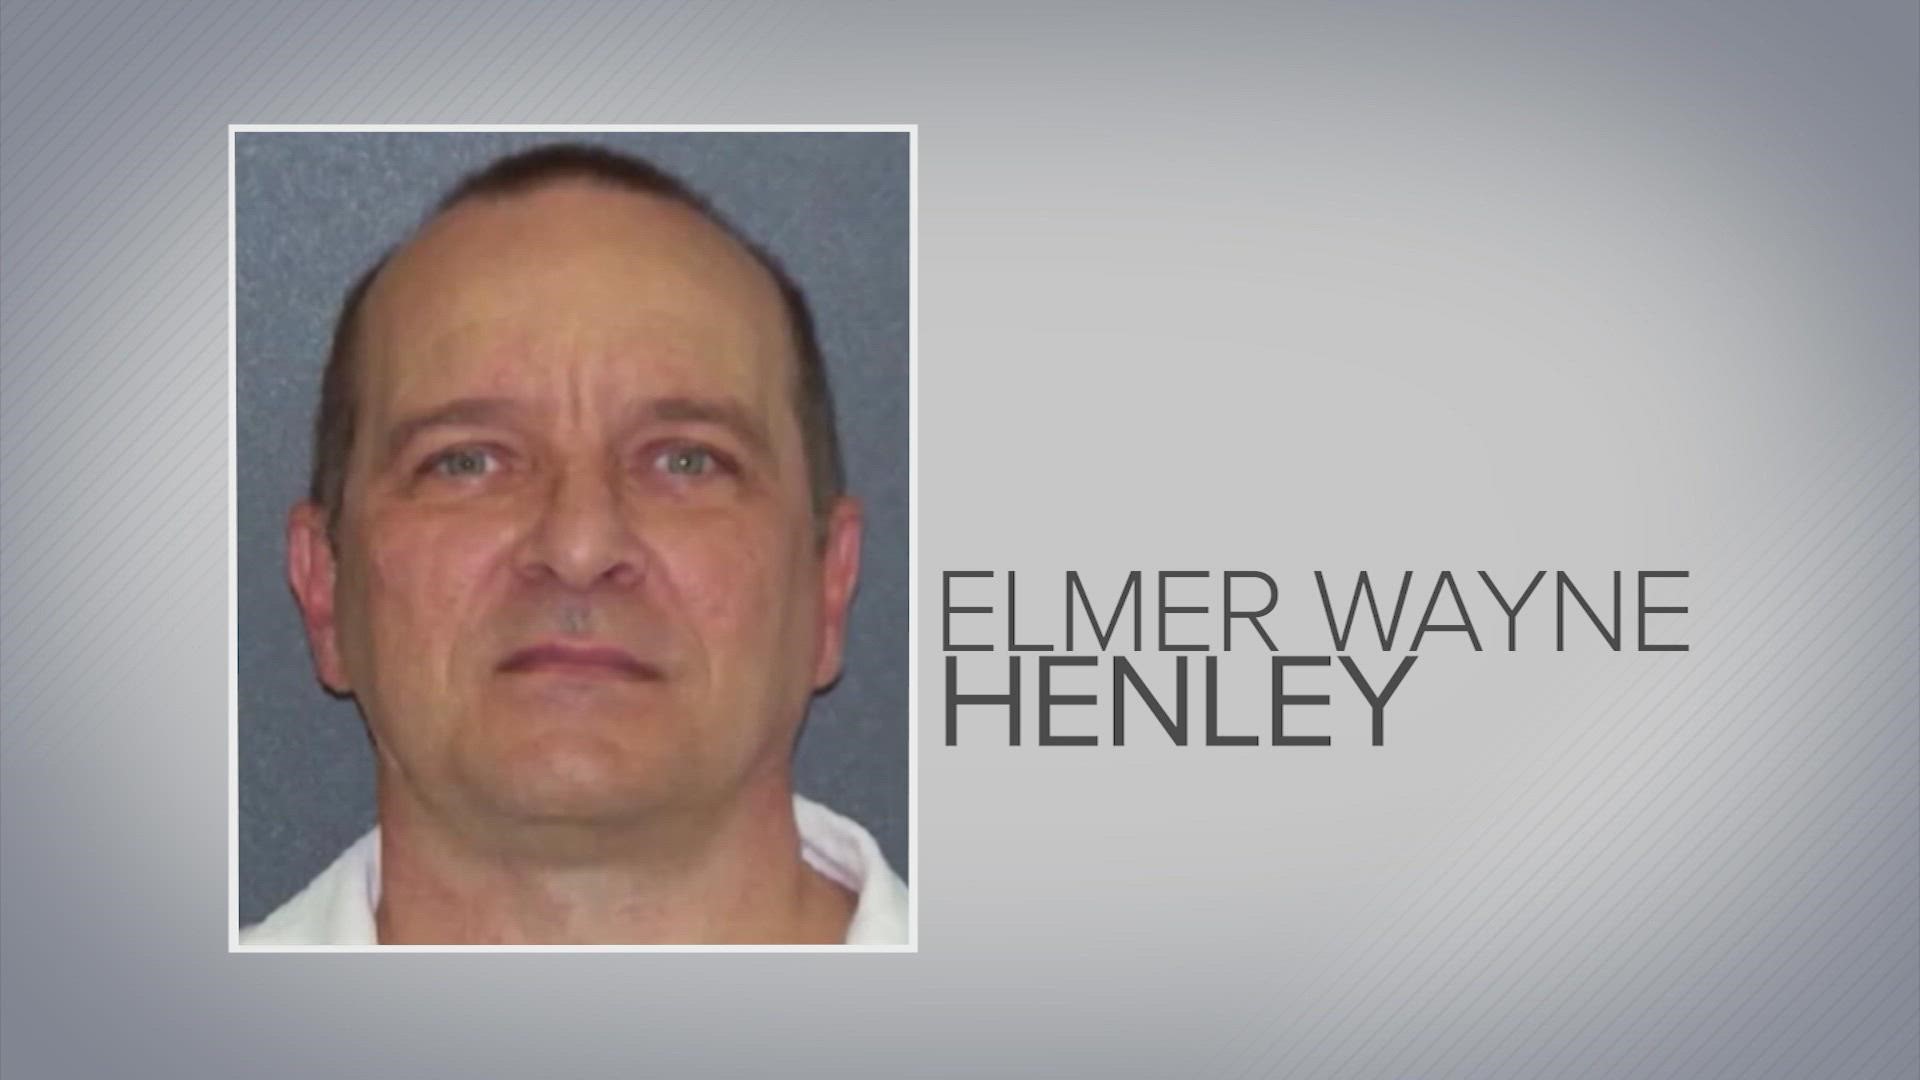 Elmer Wayne Henley will not be considered for early release by the Texas Board of Pardons and Paroles, according to the TDCJ.